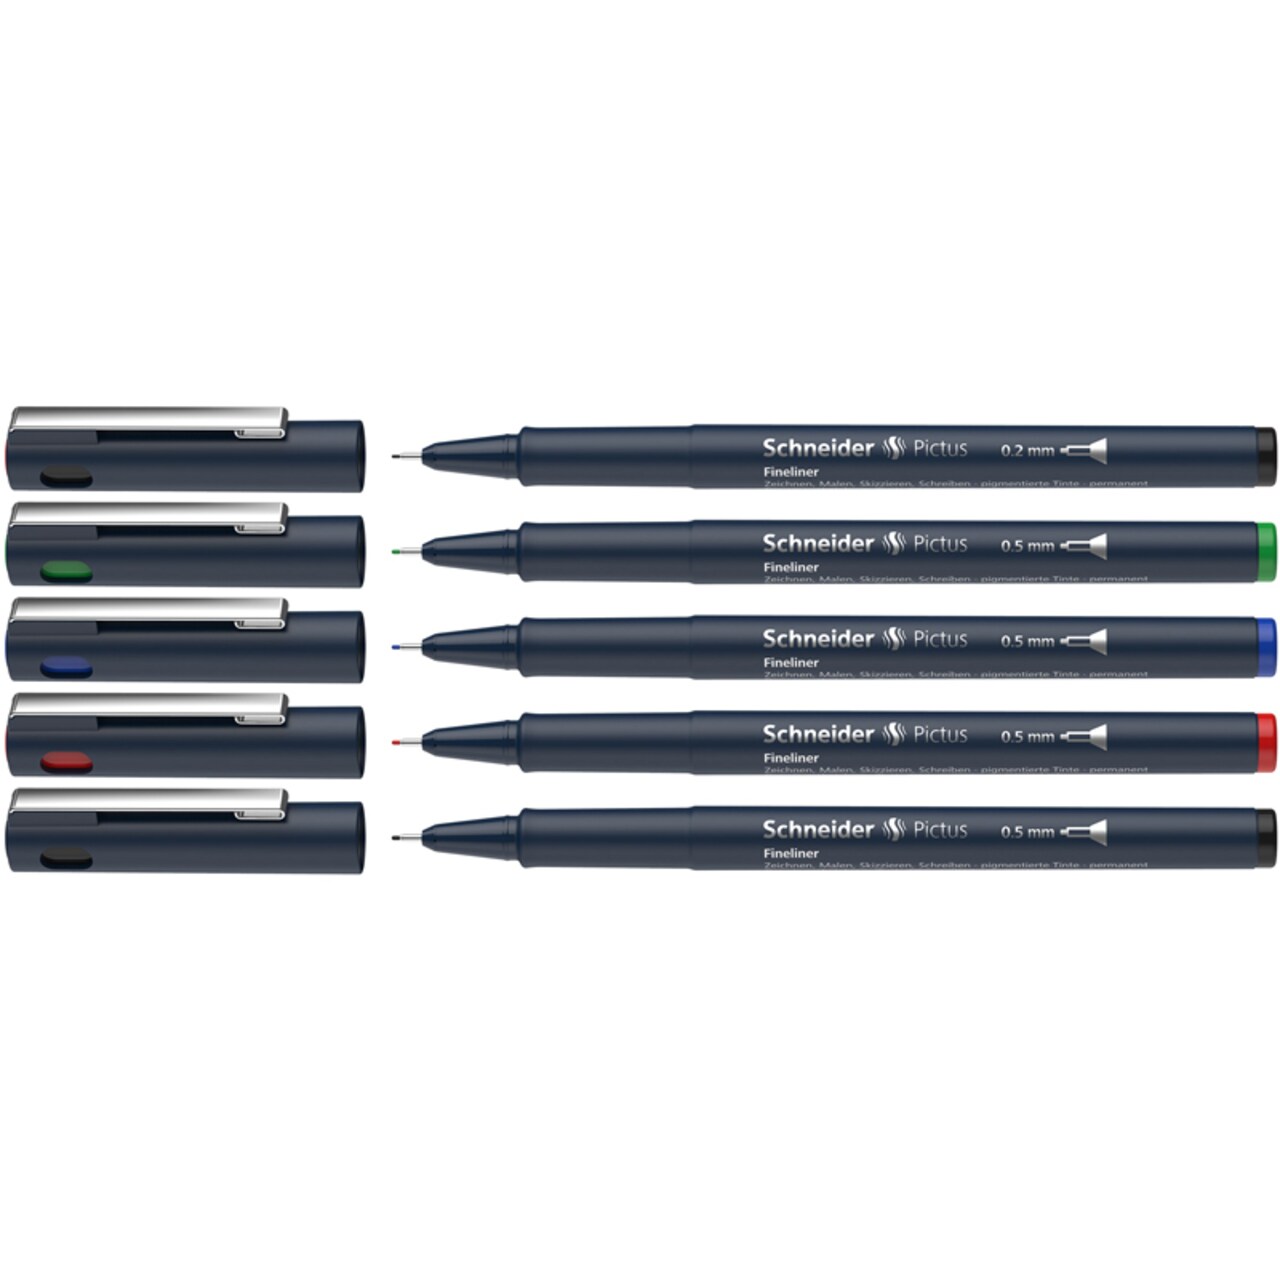 Pictus Fineliners, Wallet, 5 Pieces, Assorted Colors And Sizes